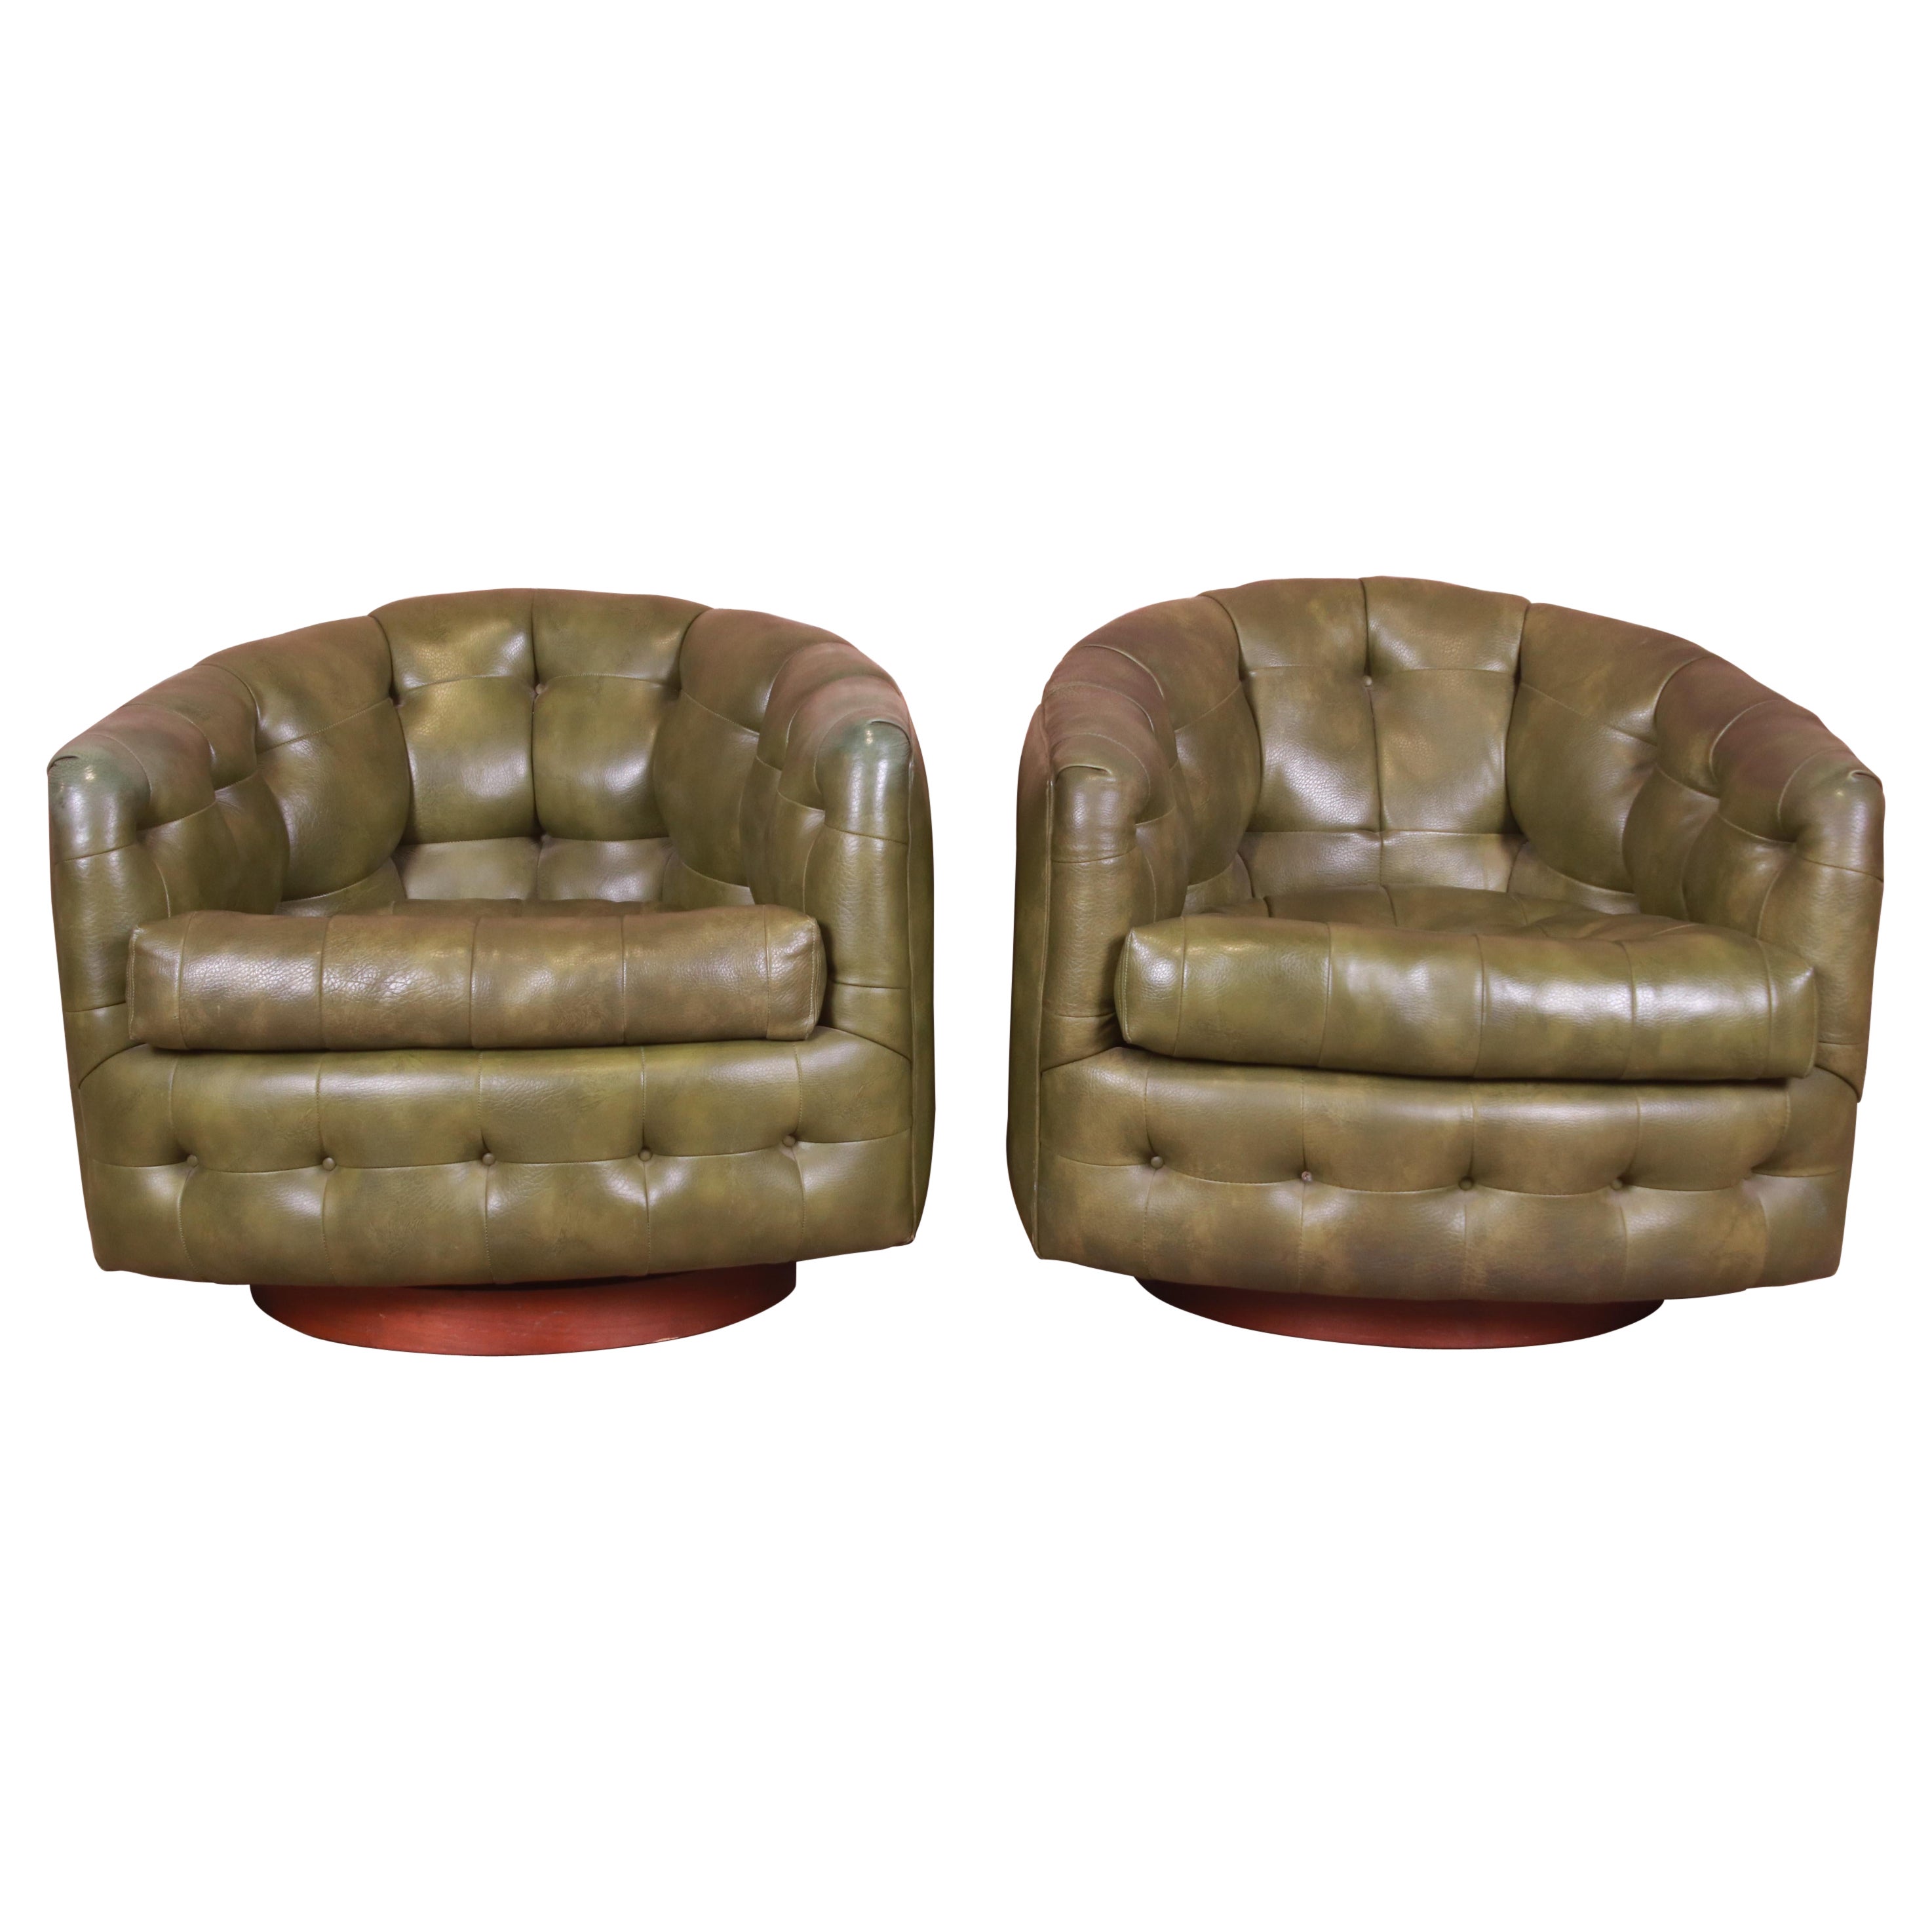 Milo Baughman for Thayer Coggin Tufted Barrel Back Swiveling Lounge Chairs, Pair